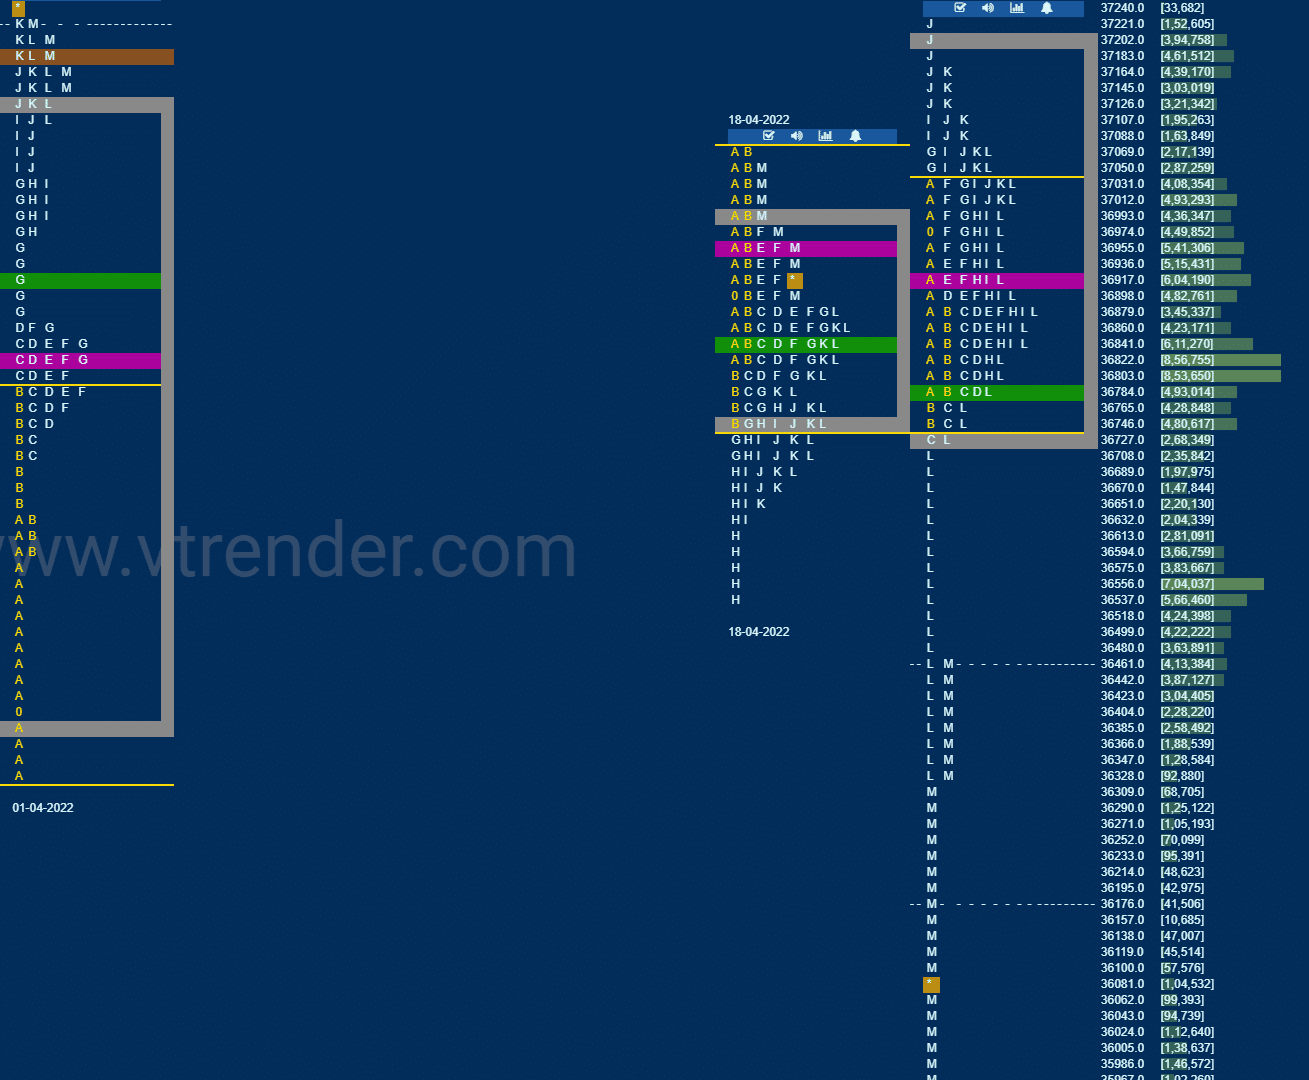 Bnf 10 Market Profile Analysis Dated 19Th April 2022 Banknifty Futures, Charts, Day Trading, Intraday Trading, Intraday Trading Strategies, Market Profile, Market Profile Trading Strategies, Nifty Futures, Order Flow Analysis, Support And Resistance, Technical Analysis, Trading Strategies, Volume Profile Trading